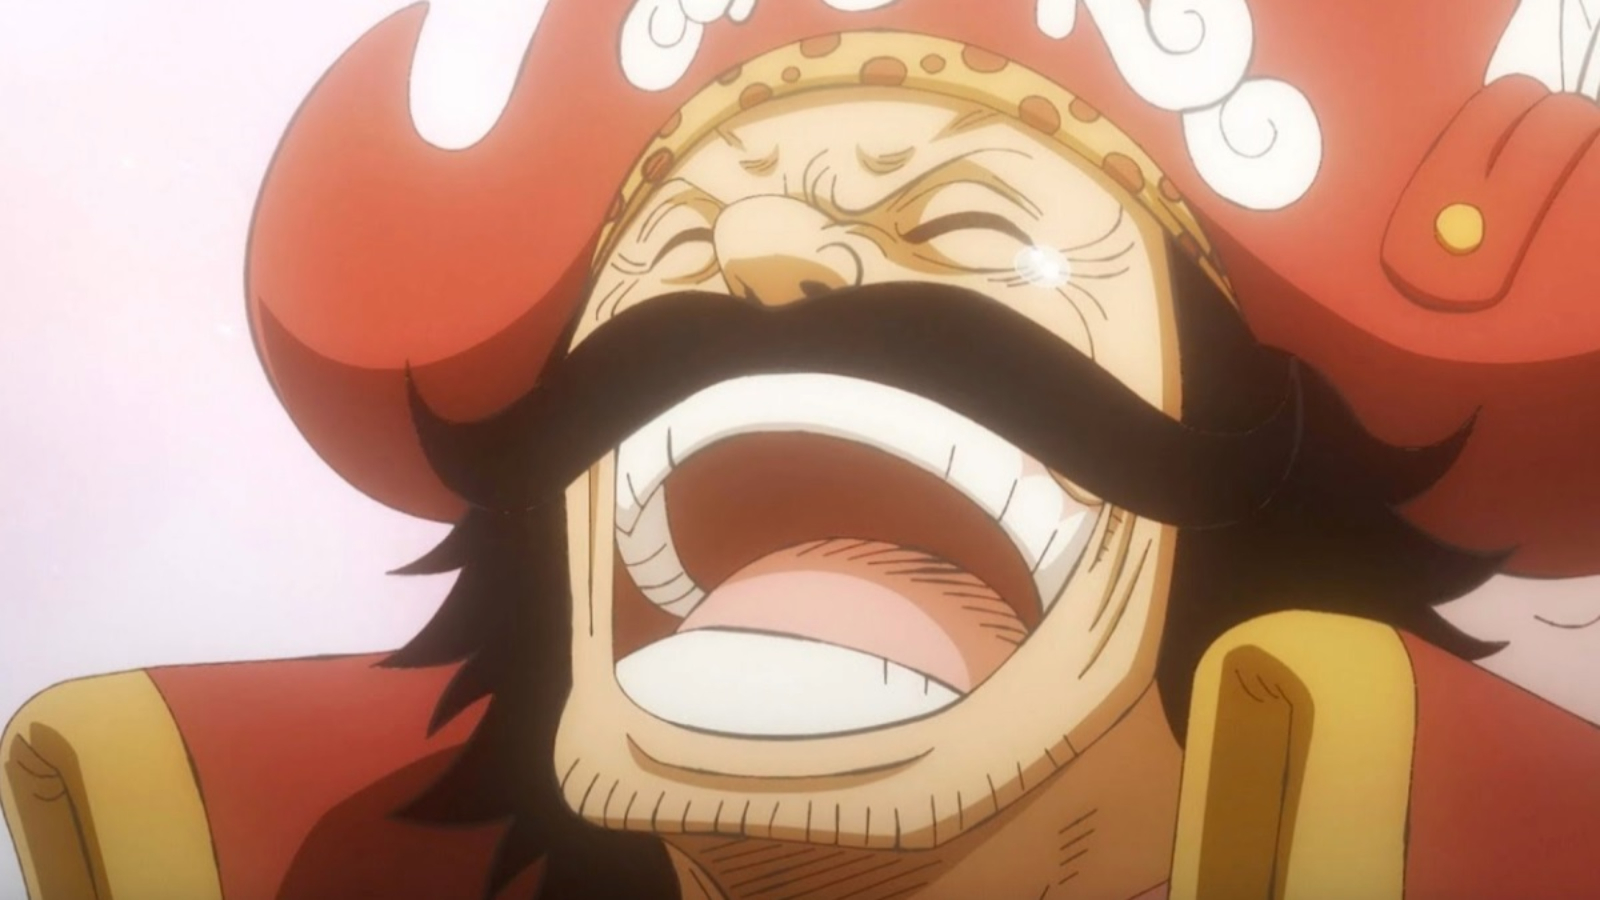 One Piece fans discovered a funny animation error